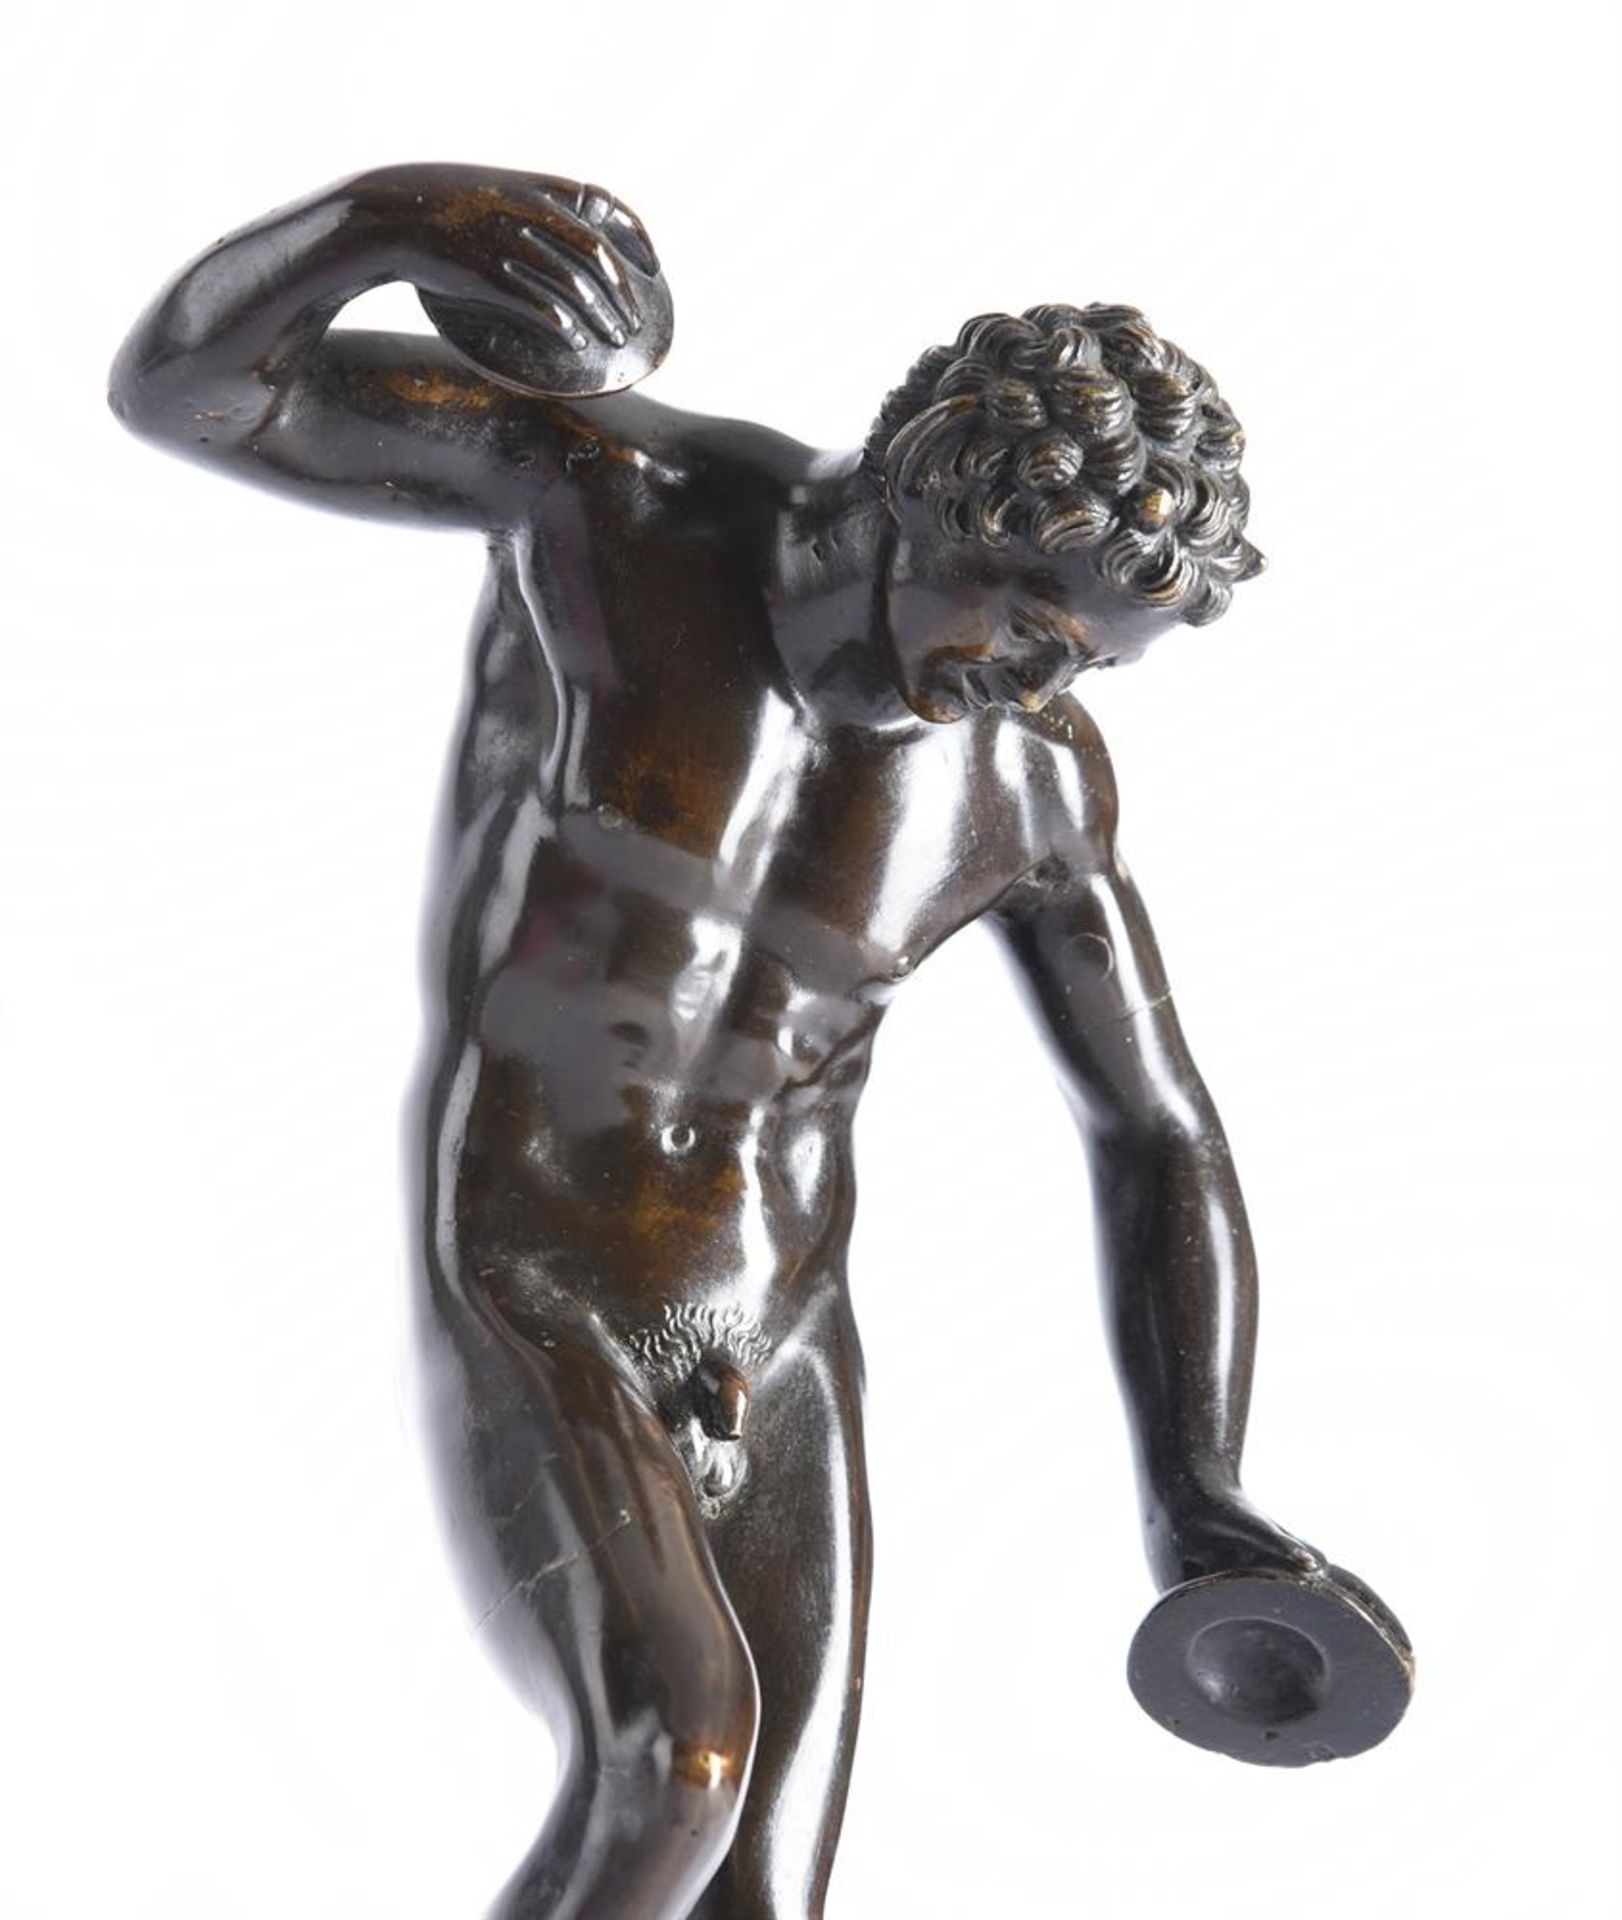 A BRONZE FIGURE OF THE DANCING FAUN WITH CYMBALS, 18TH/19TH CENTURY, PROBABLY ITALIAN - Image 2 of 3